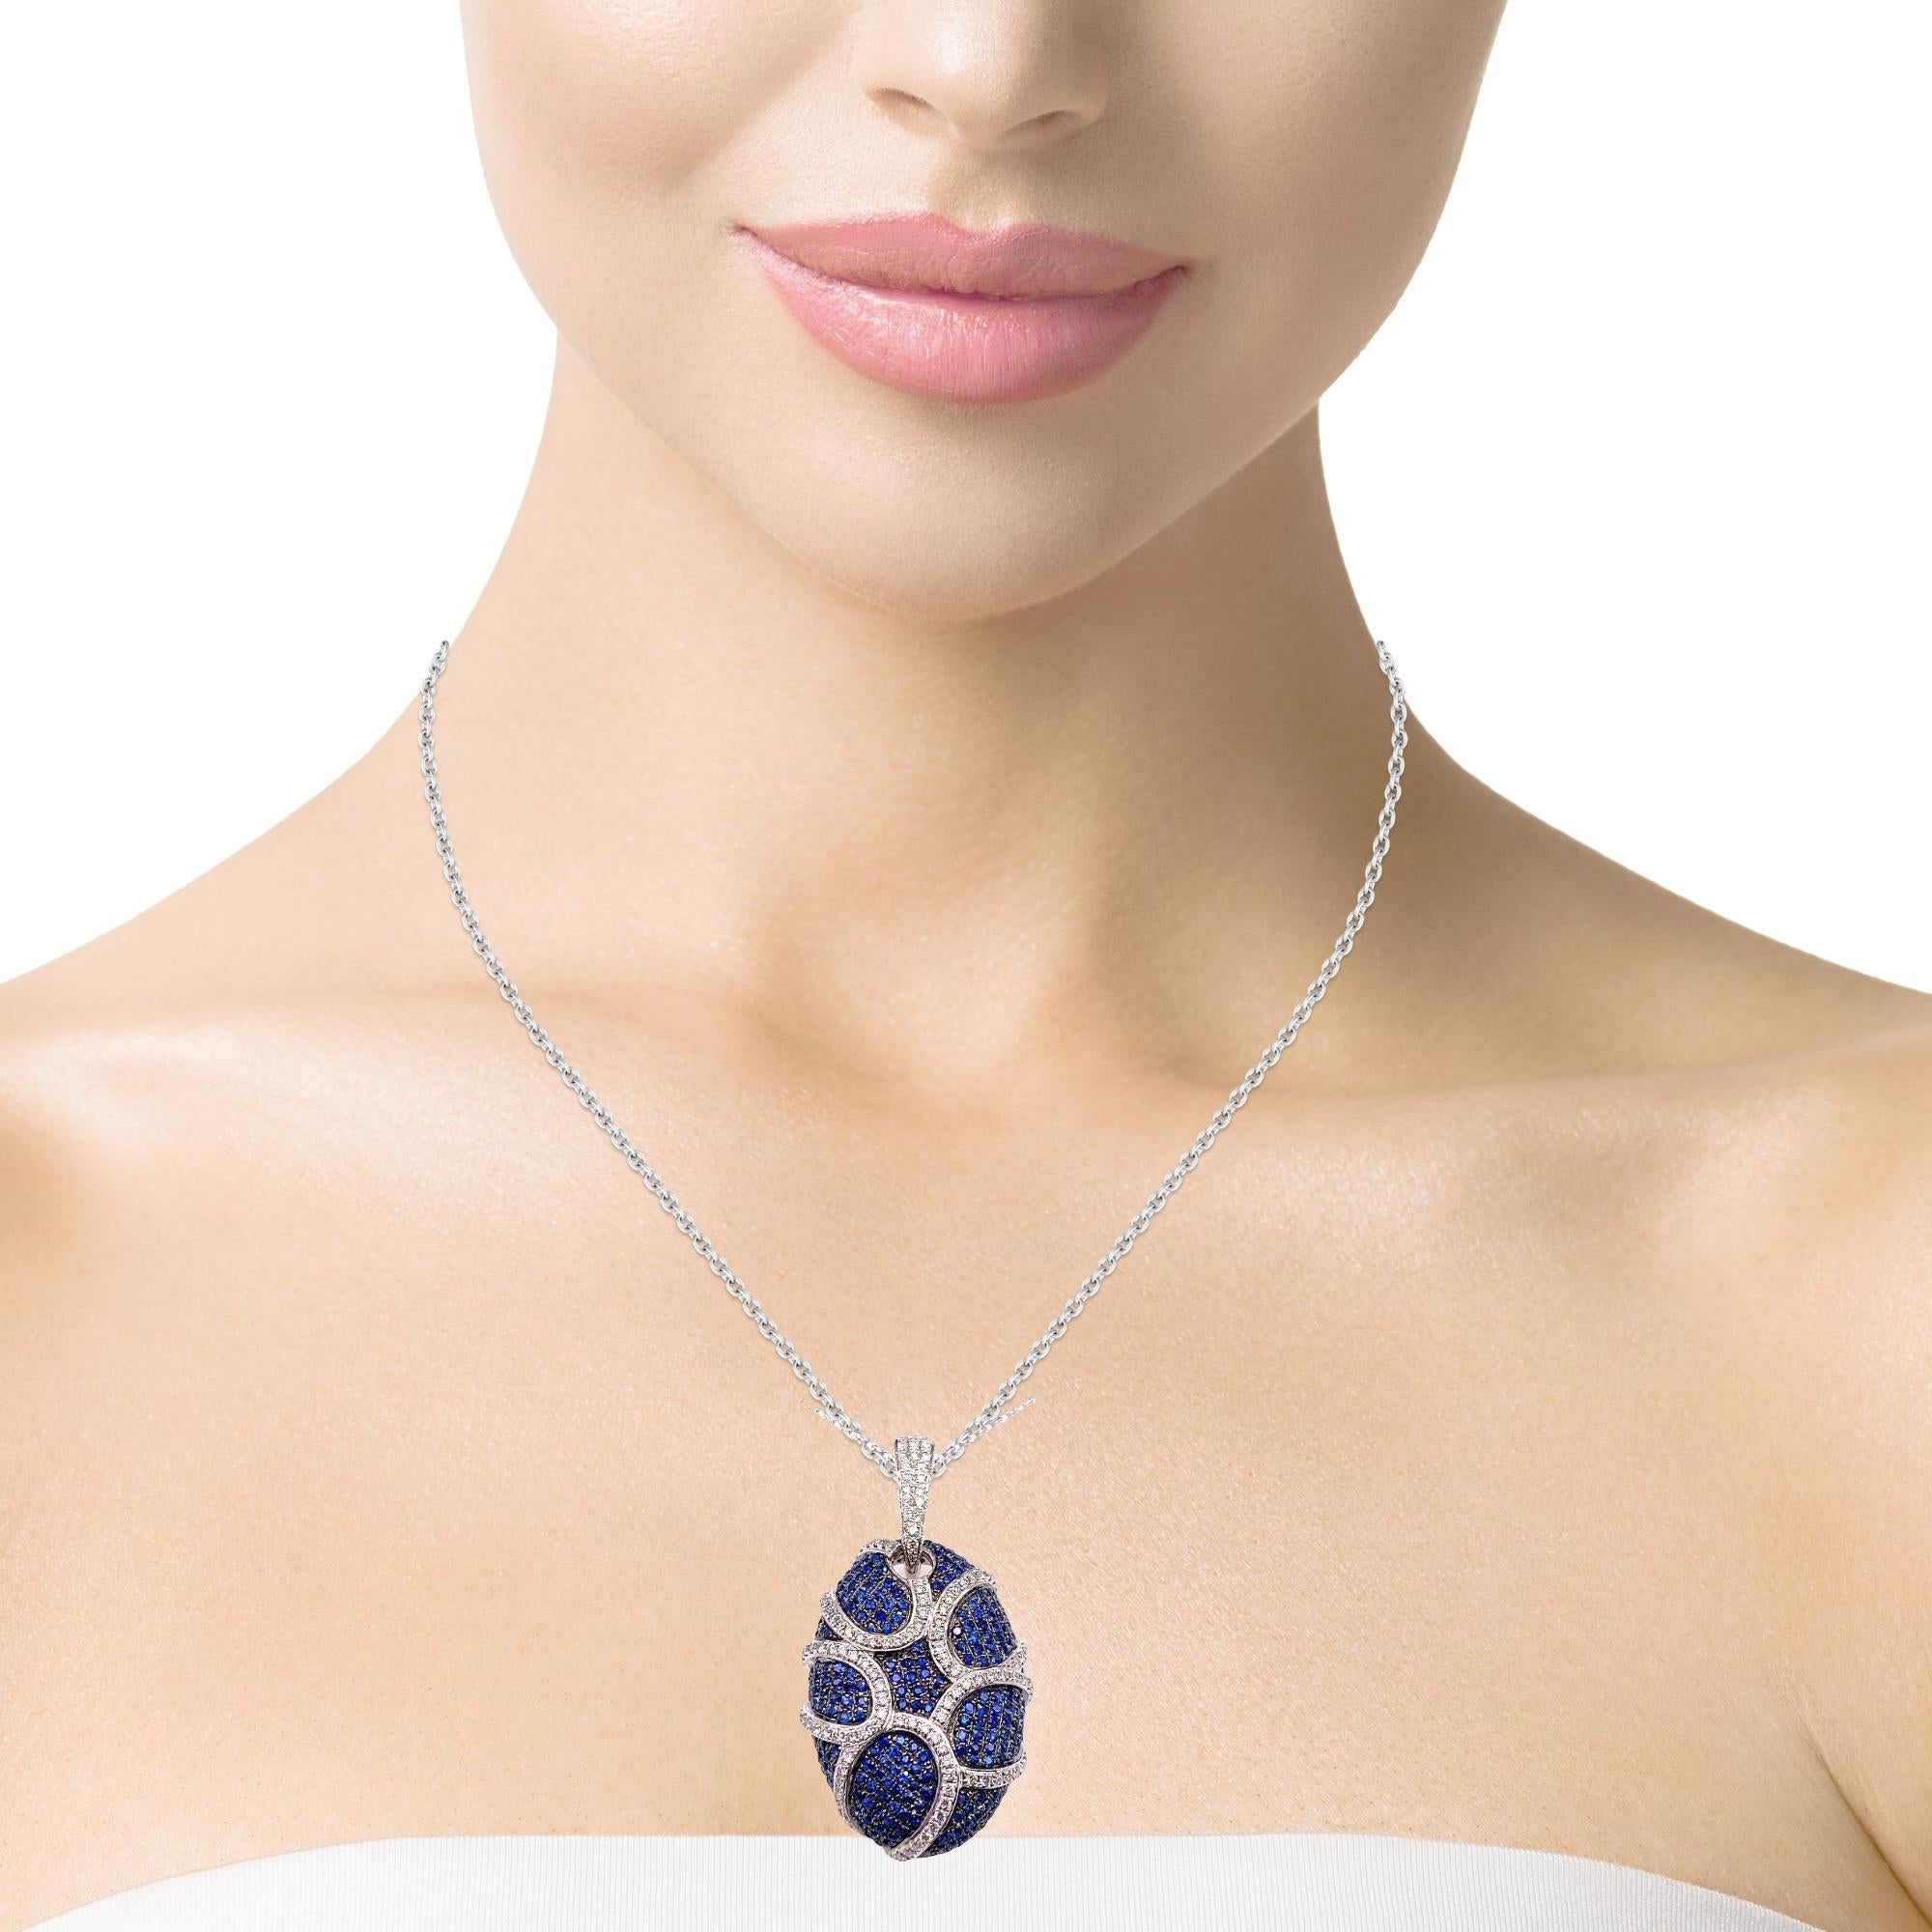 This stunning one of a kind pendant has is the perfect accessory that will catch everyones eye. There are 300 Ceylon Sapphires and 141 brilliant cut diamonds all pave set in 18 karat white gold. This pendant has detailed tags attached and comes in a